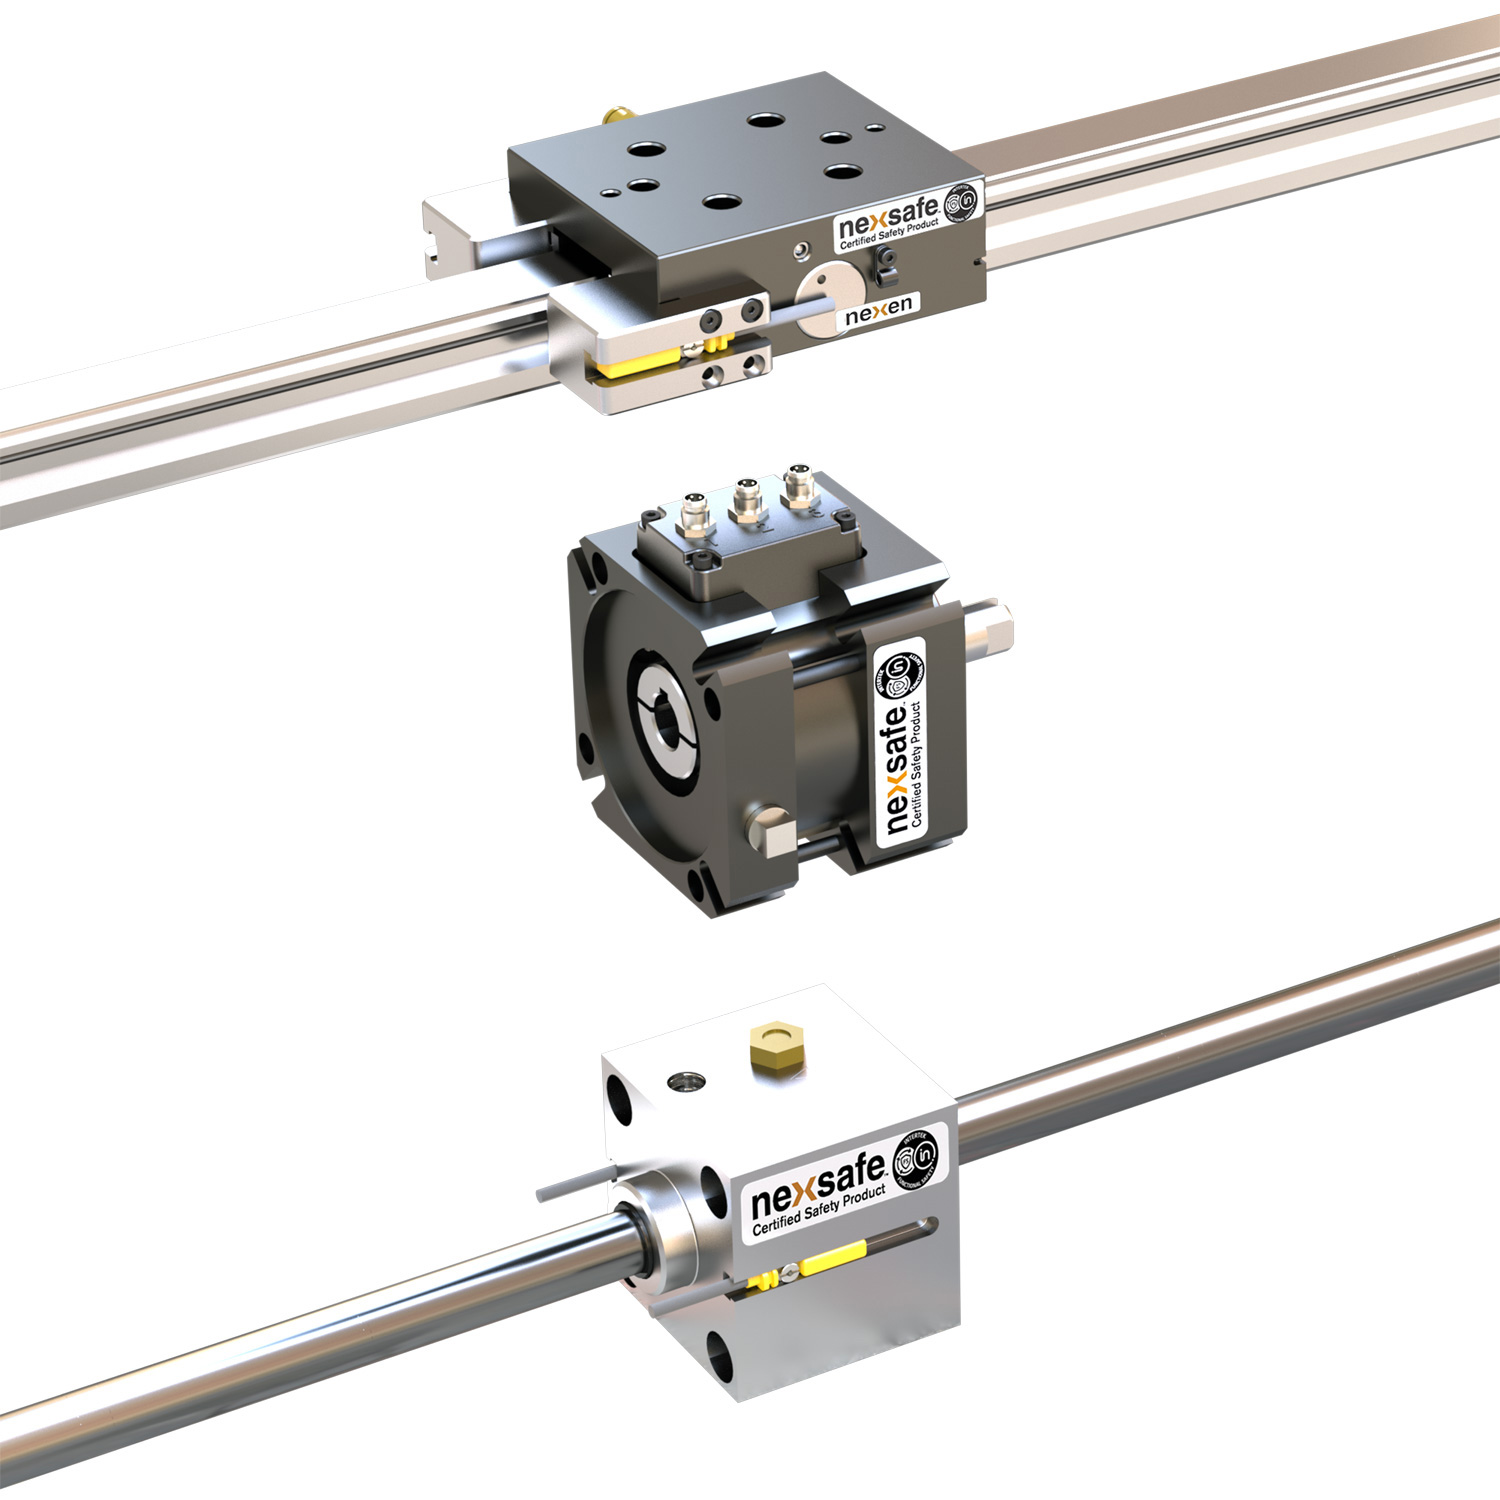 From top to bottom: NexSafe rail brake for installation on profiled guide rails on linear axes; NexSafe servo brake for installation between servomotors and their gearboxes; NexSafe rod lock for installation with or on pneumatic cylinders. 